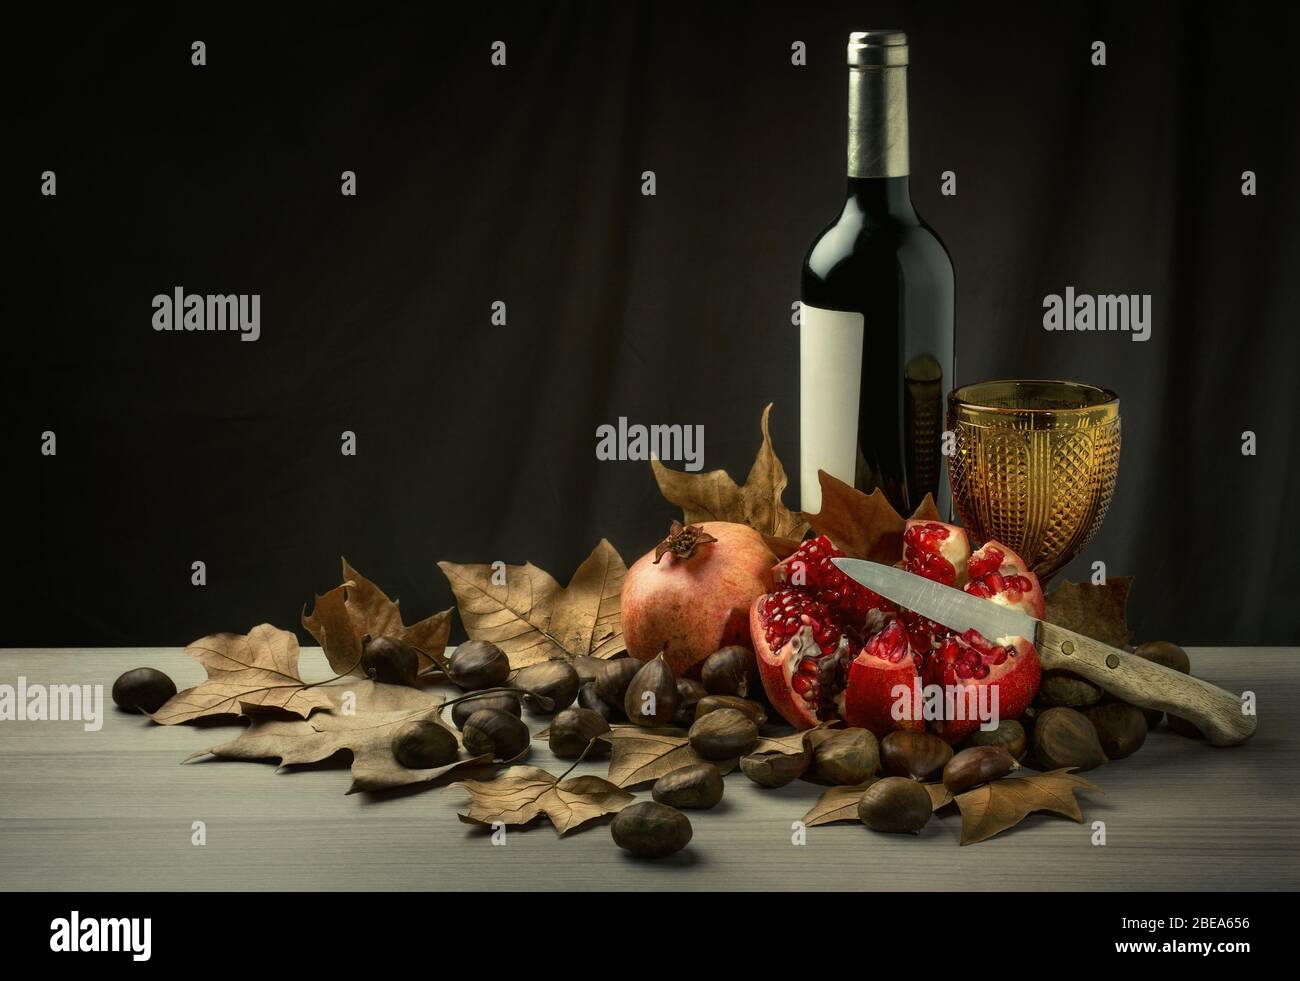 https://c8.alamy.com/comp/2BEA656/autumn-fall-still-life-with-red-wine-pomegranate-and-chestnuts-2BEA656.jpg